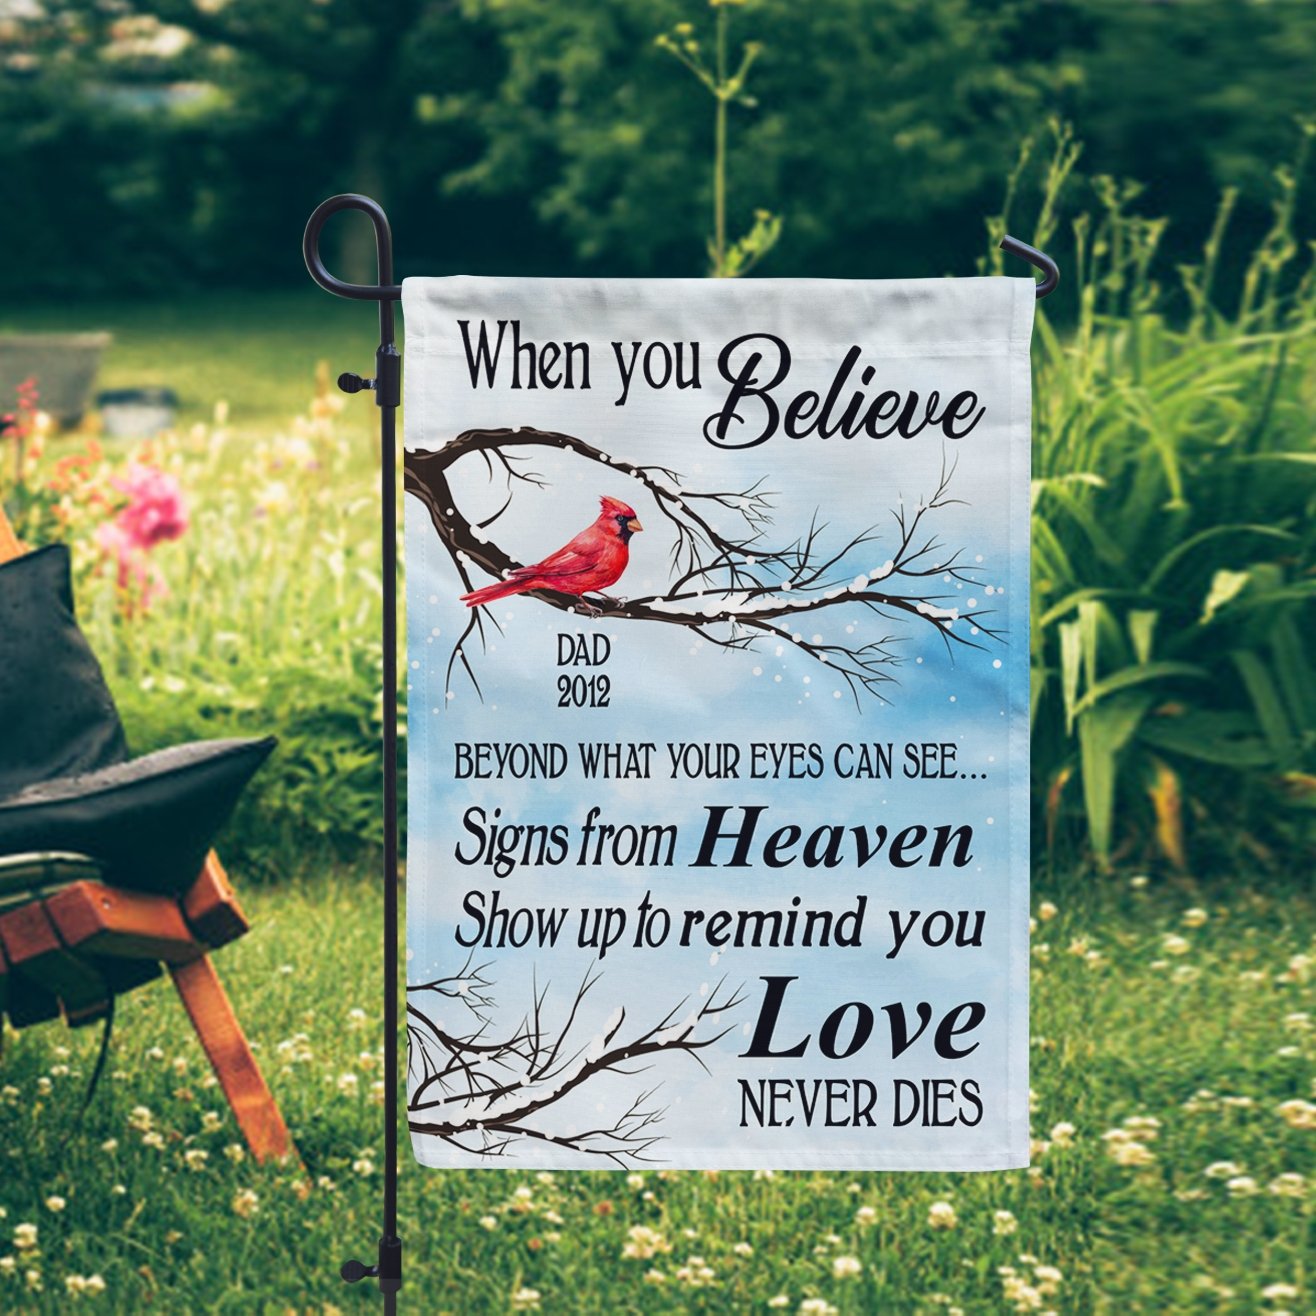 Decorating a memorial garden provides peace, comfort, and healing to those who lose their grandparents. Then, why not help them overcome this sorrow with this Custom Memorial Garden Flag? It’s particularly appropriate when honoring your departed grandparents who loved nature.